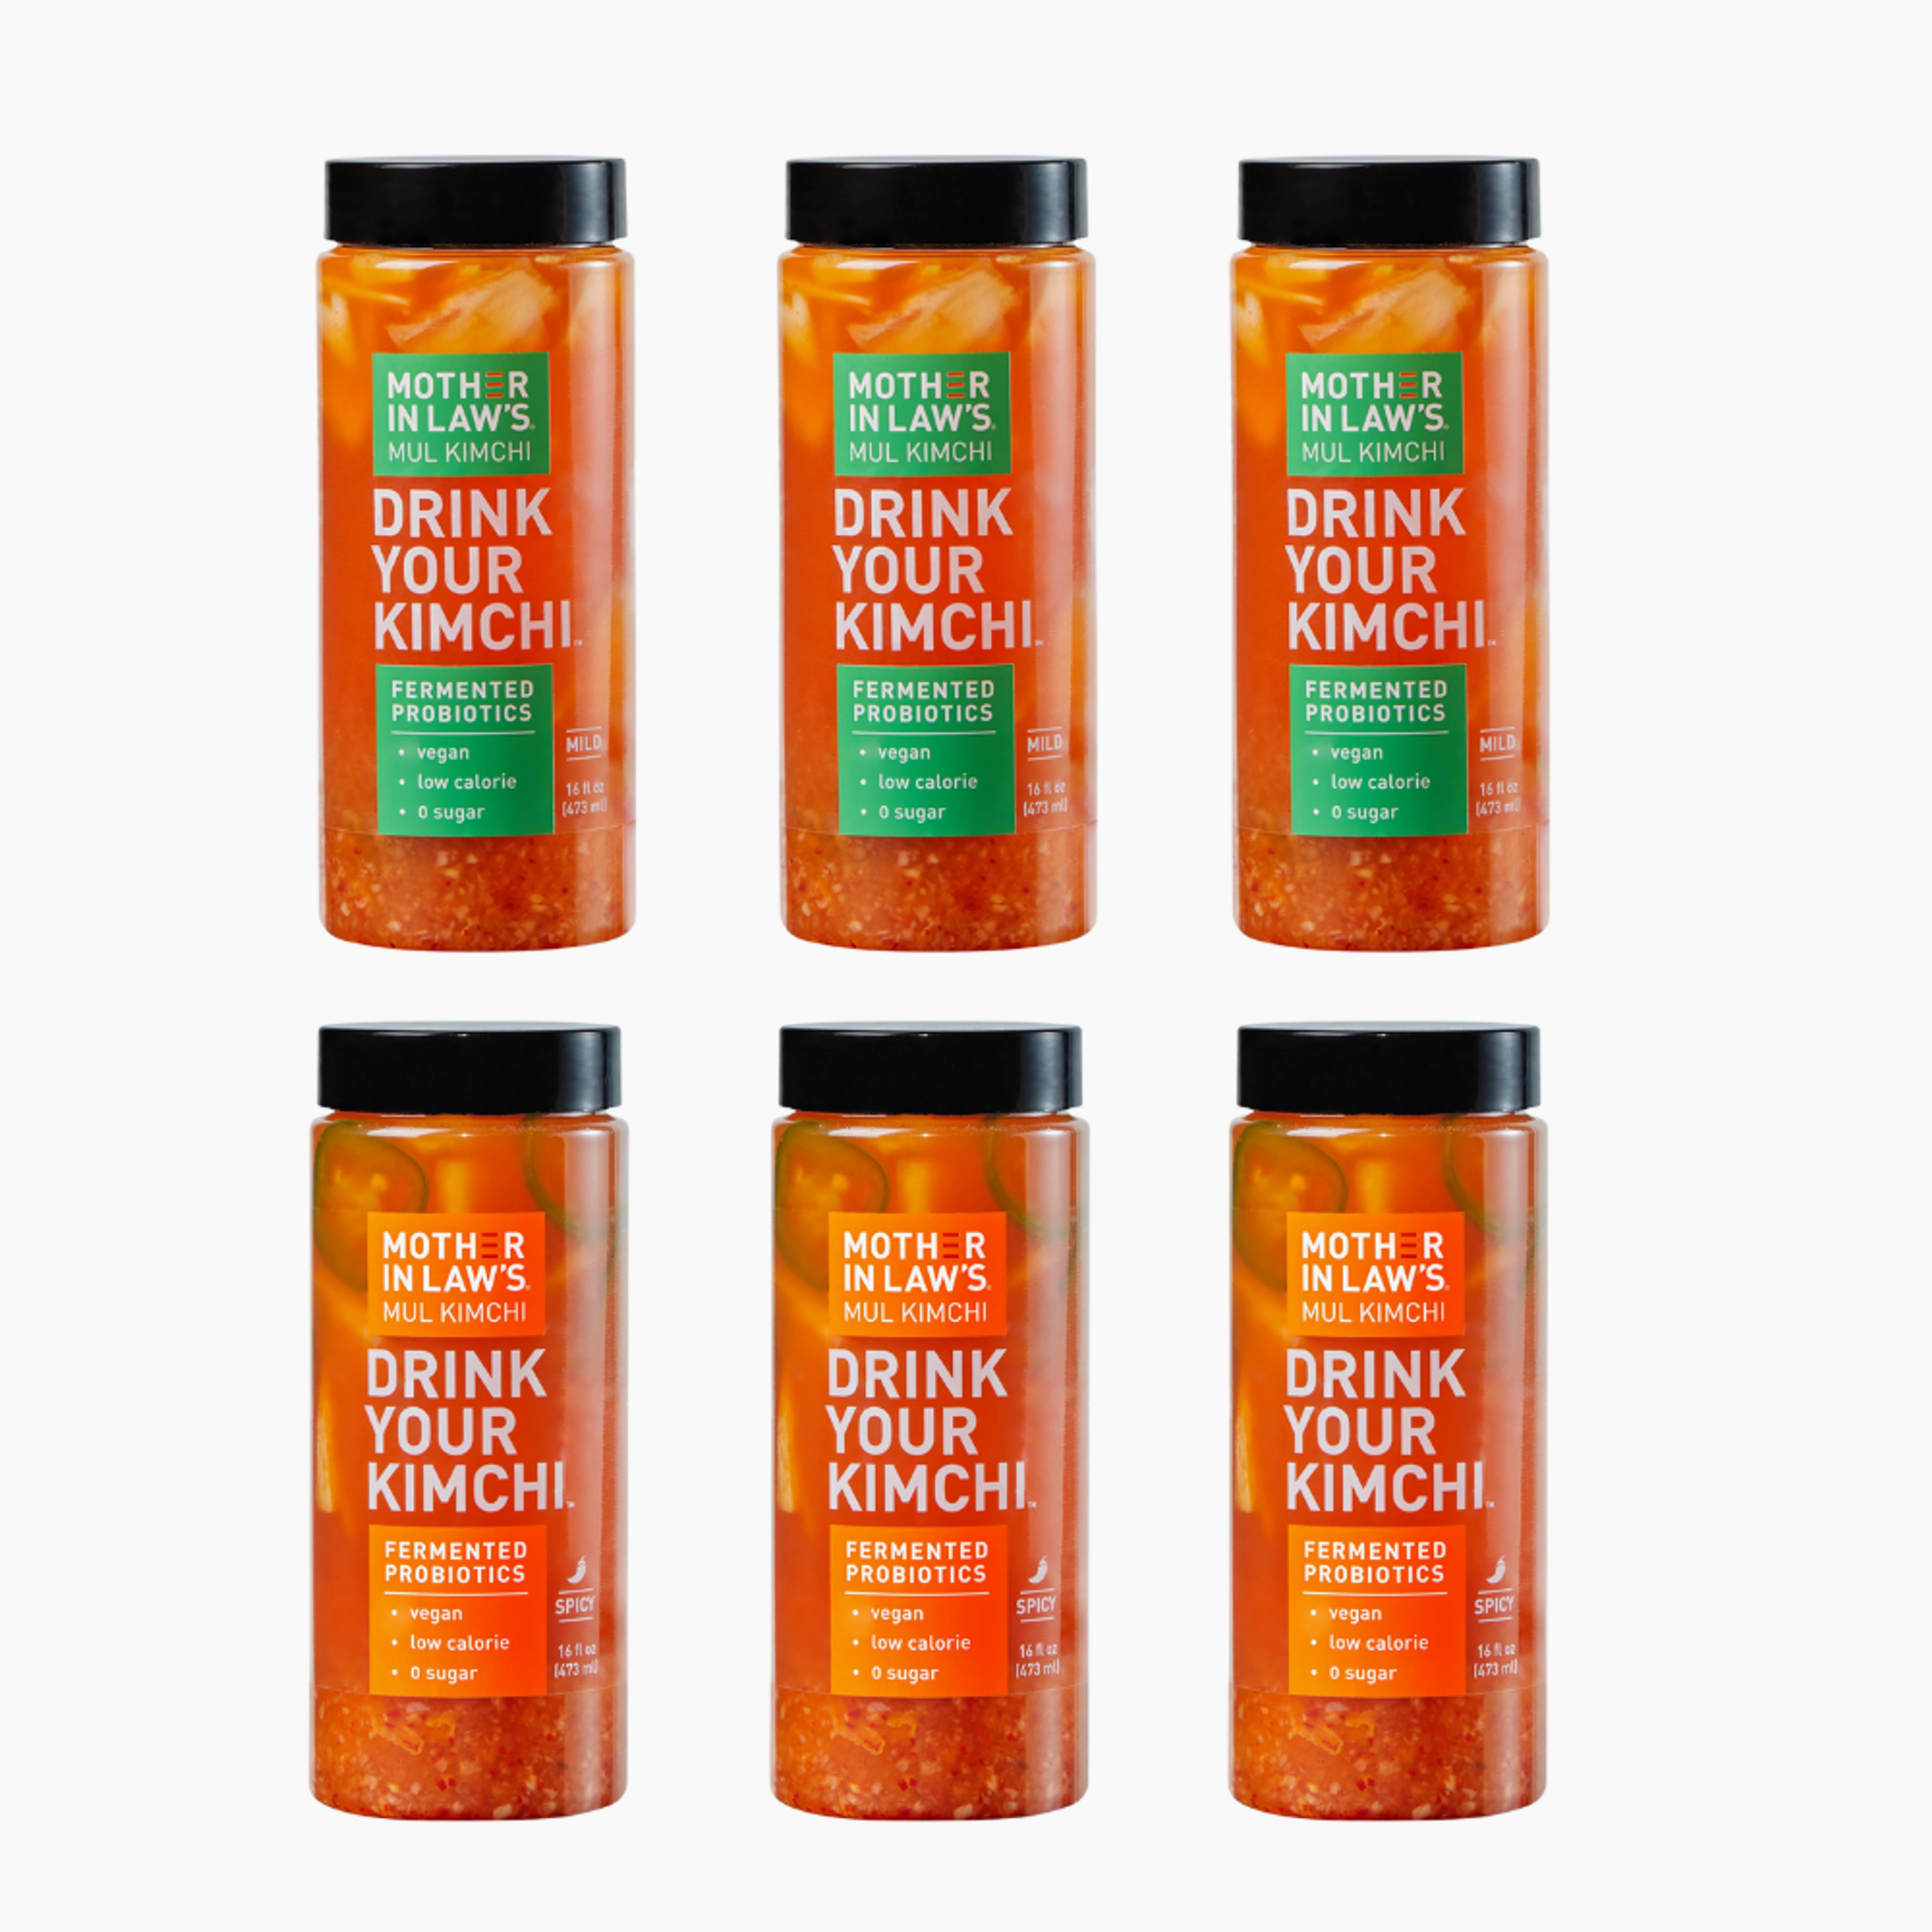 MUL Combo Kimchi Pack - 3 jars of Mild and 3 jars of Spicy